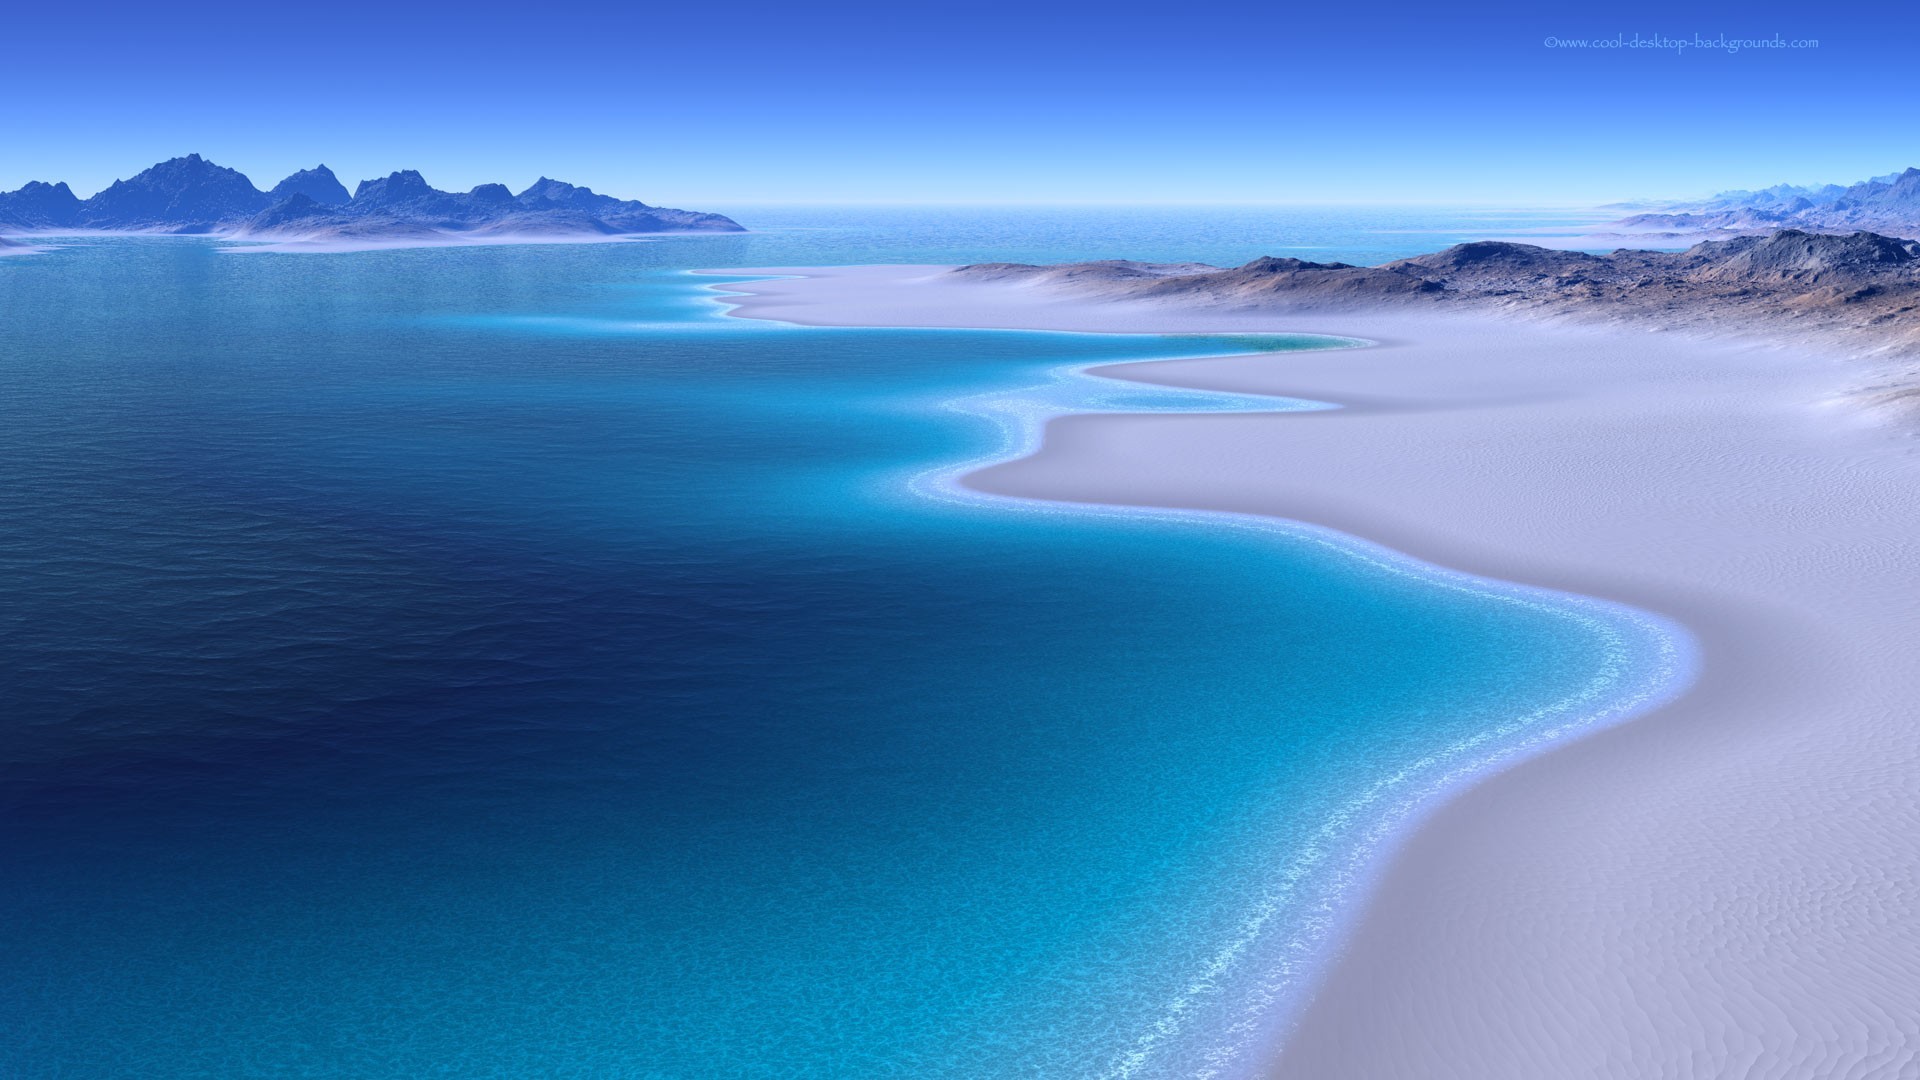 Serene Beach Desktop Wallpaper Share This Awesome On